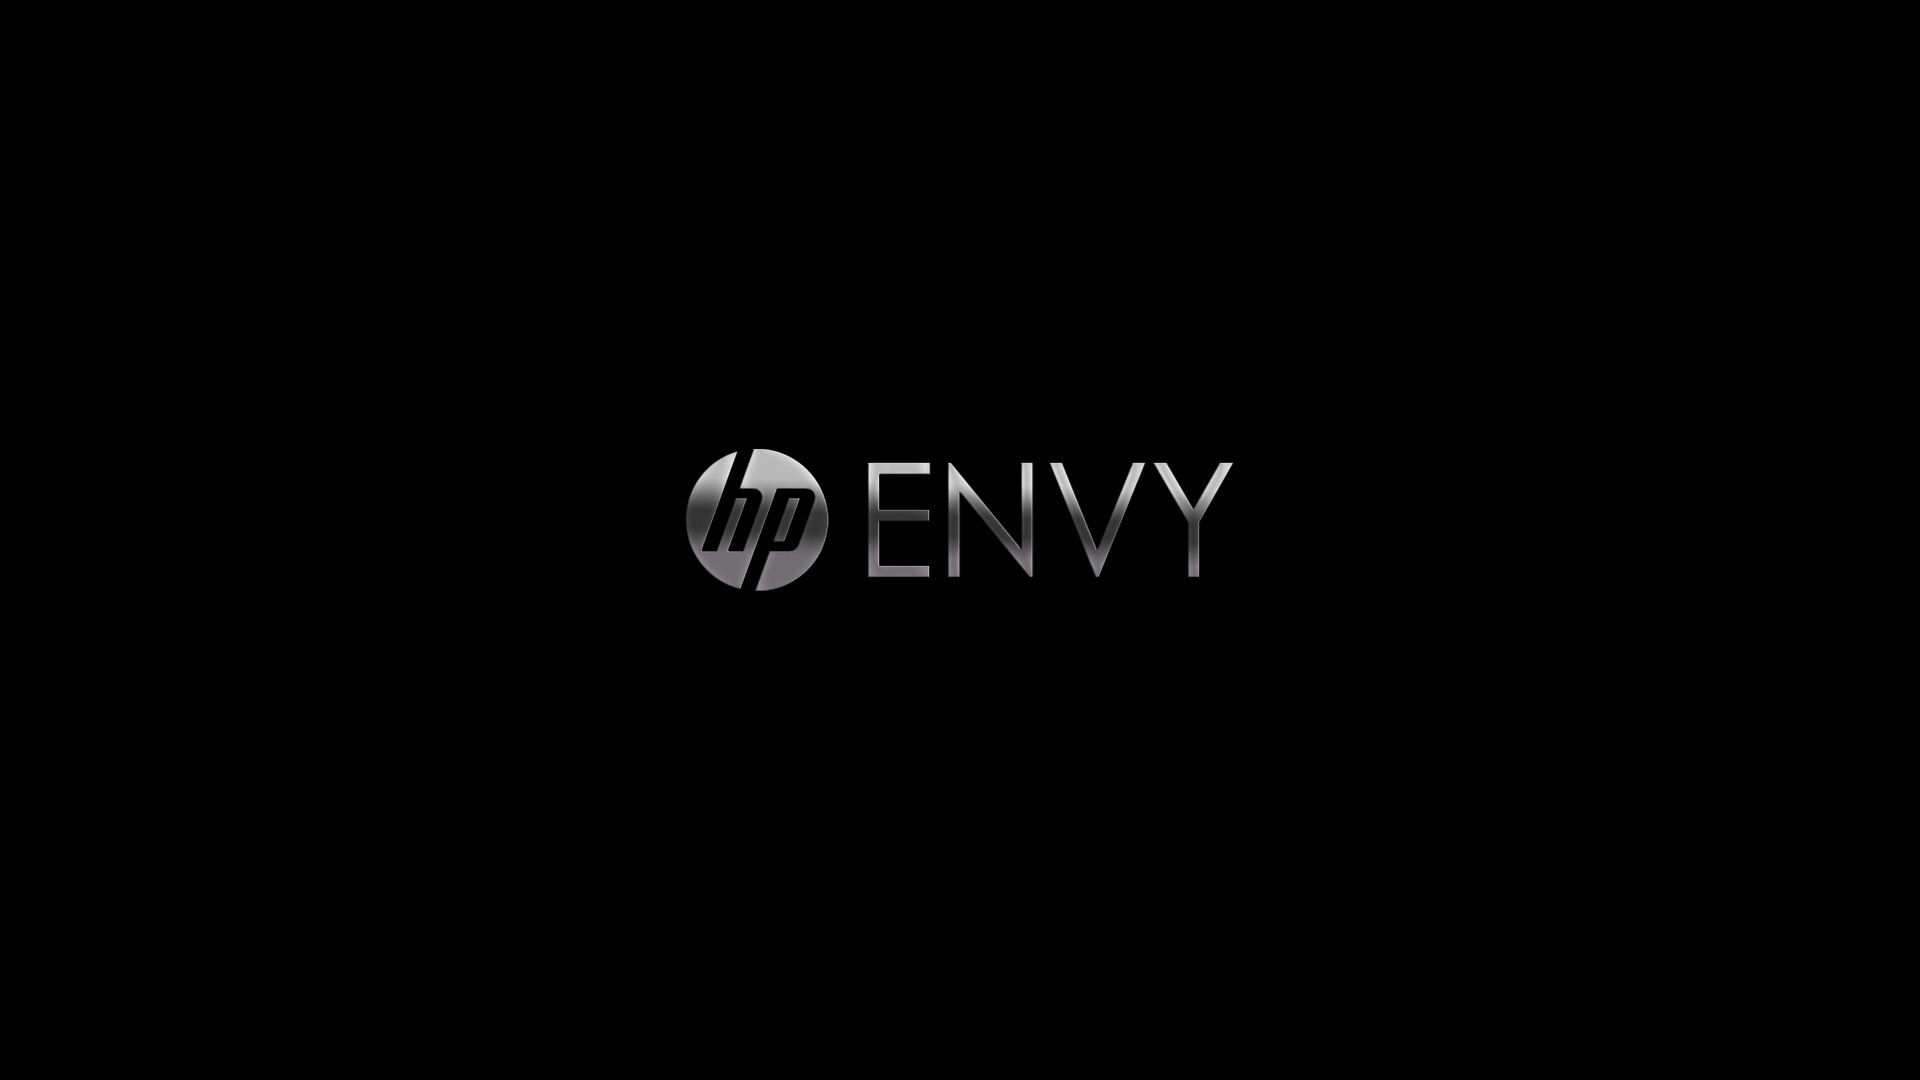 ENVY & Beats Themed Wallpapers & Icons | NotebookReview